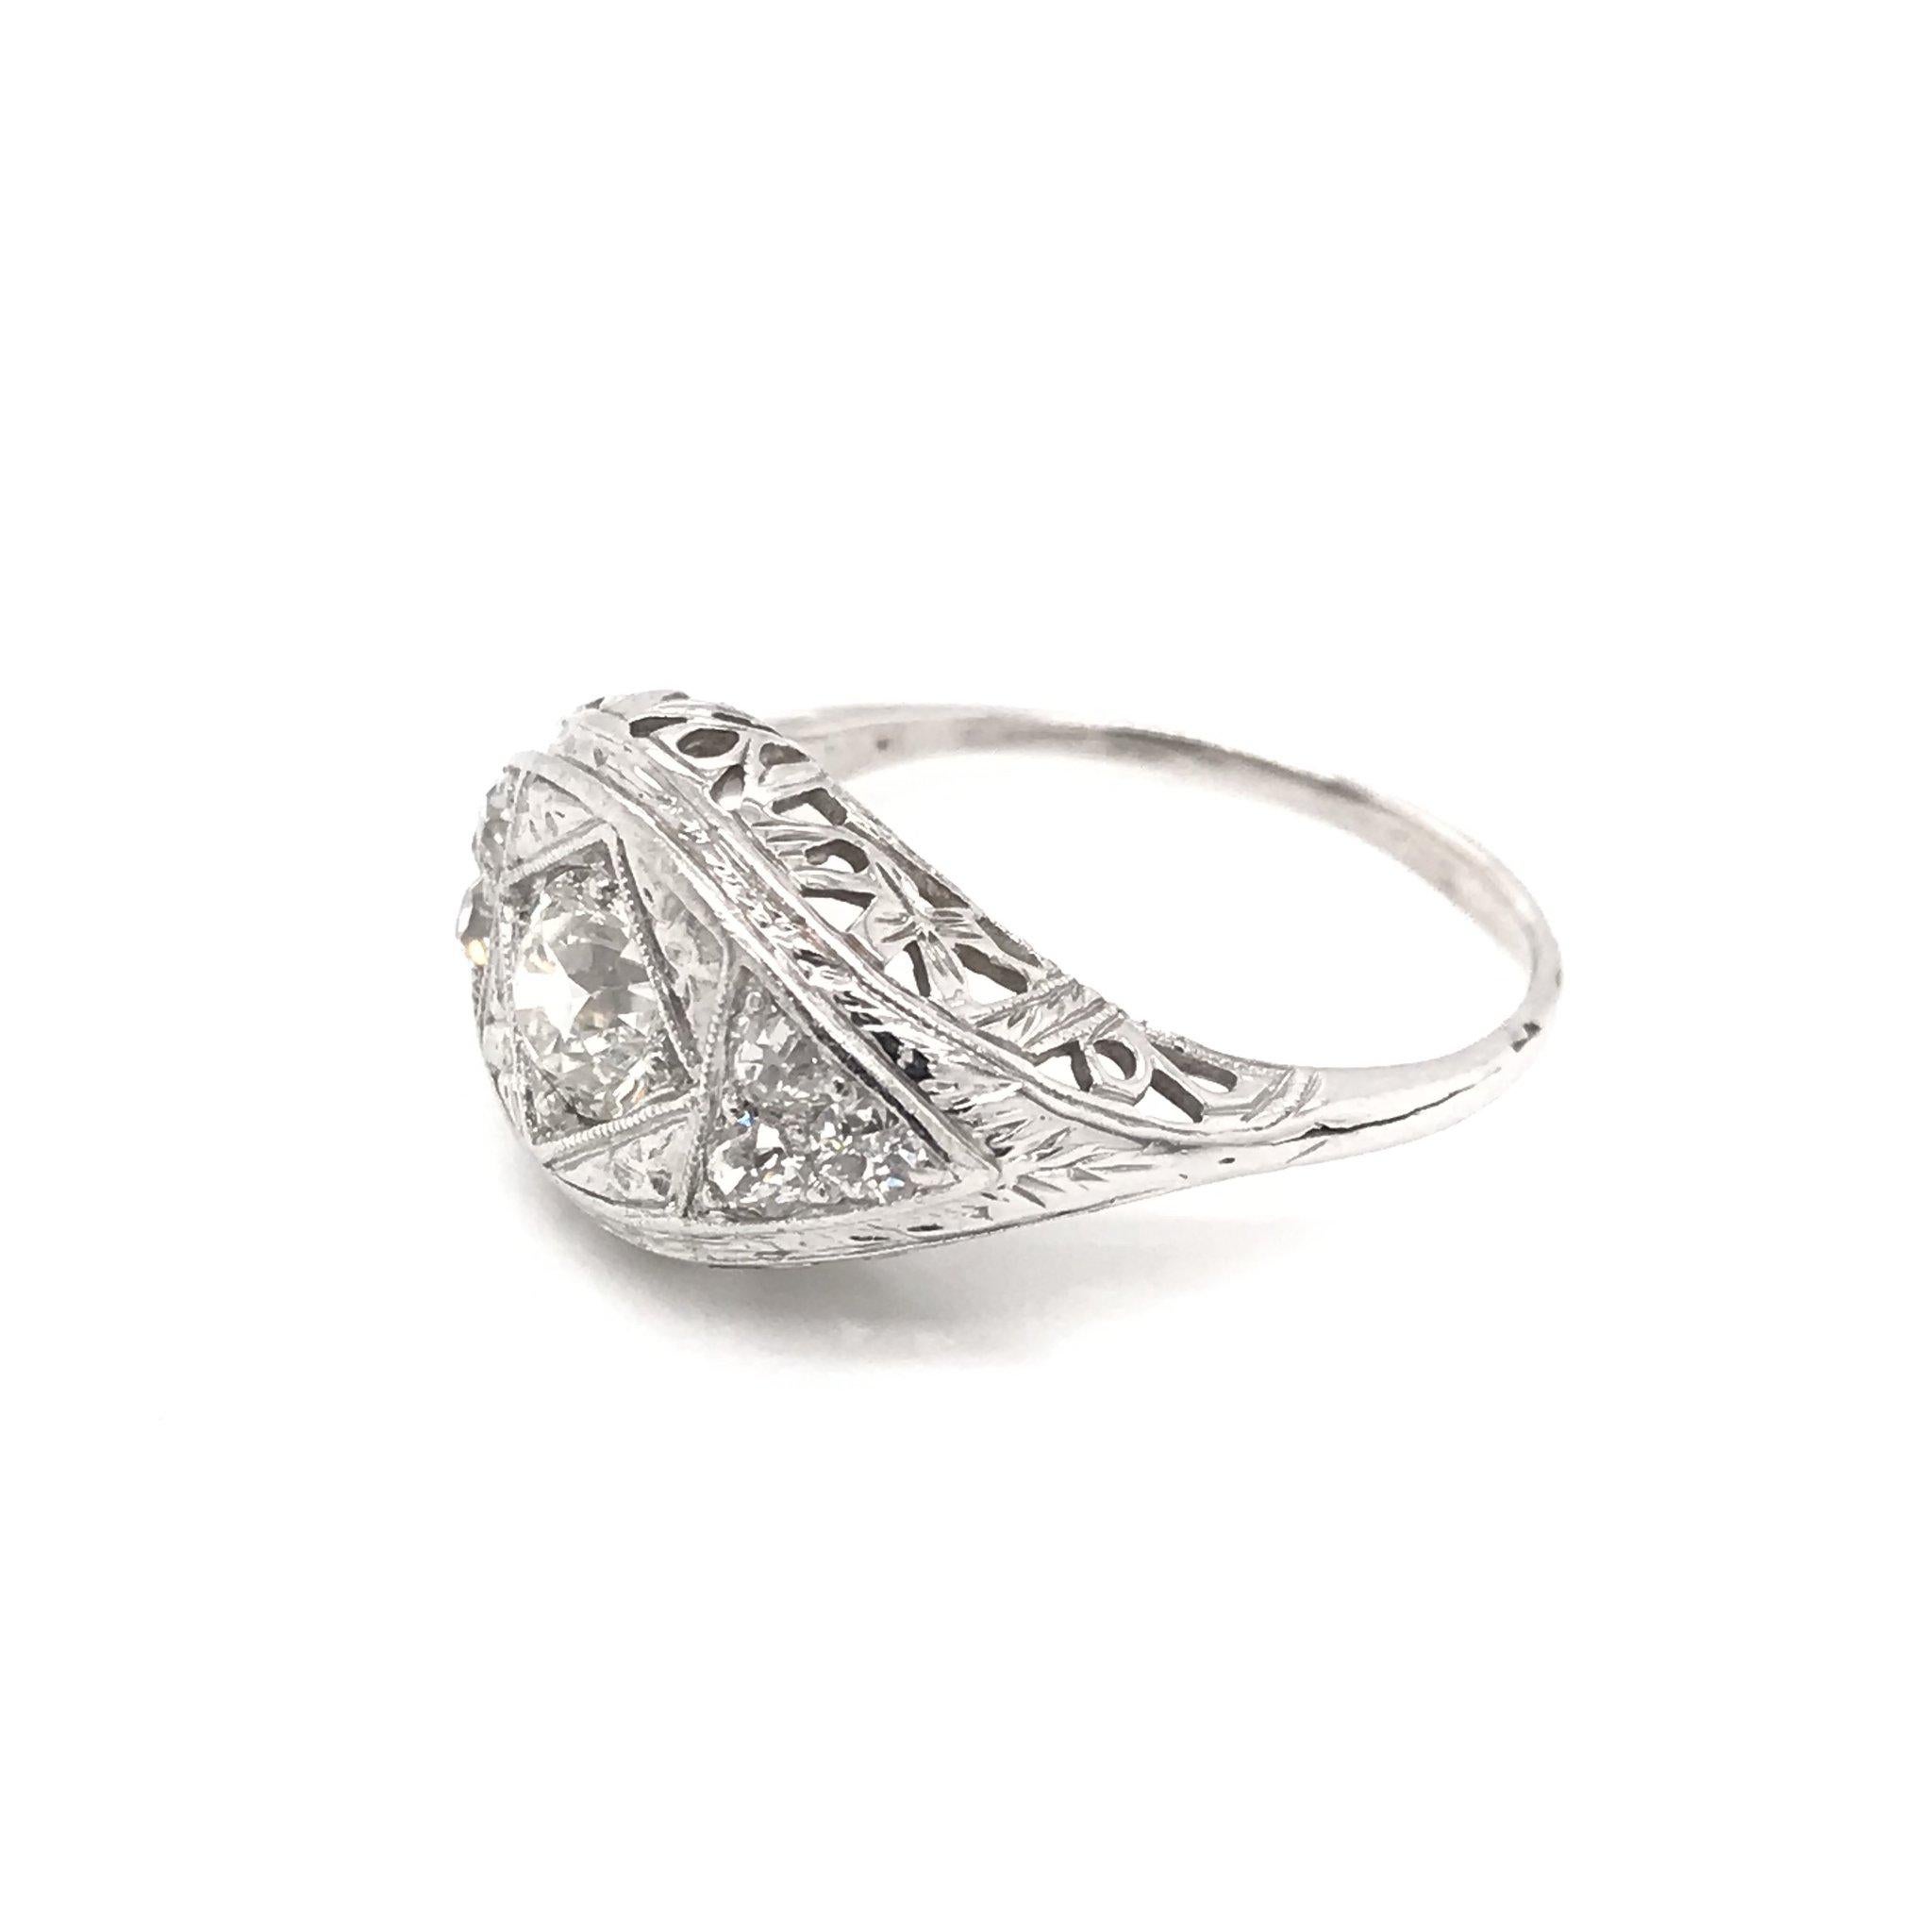 This beautiful antique piece was handcrafted sometime during the Art Deco design period ( 1920-1940 ). The exquisite 14k white gold filigree setting features a sparkling center diamond measuring approximately 0.55 carats. The center diamond grades